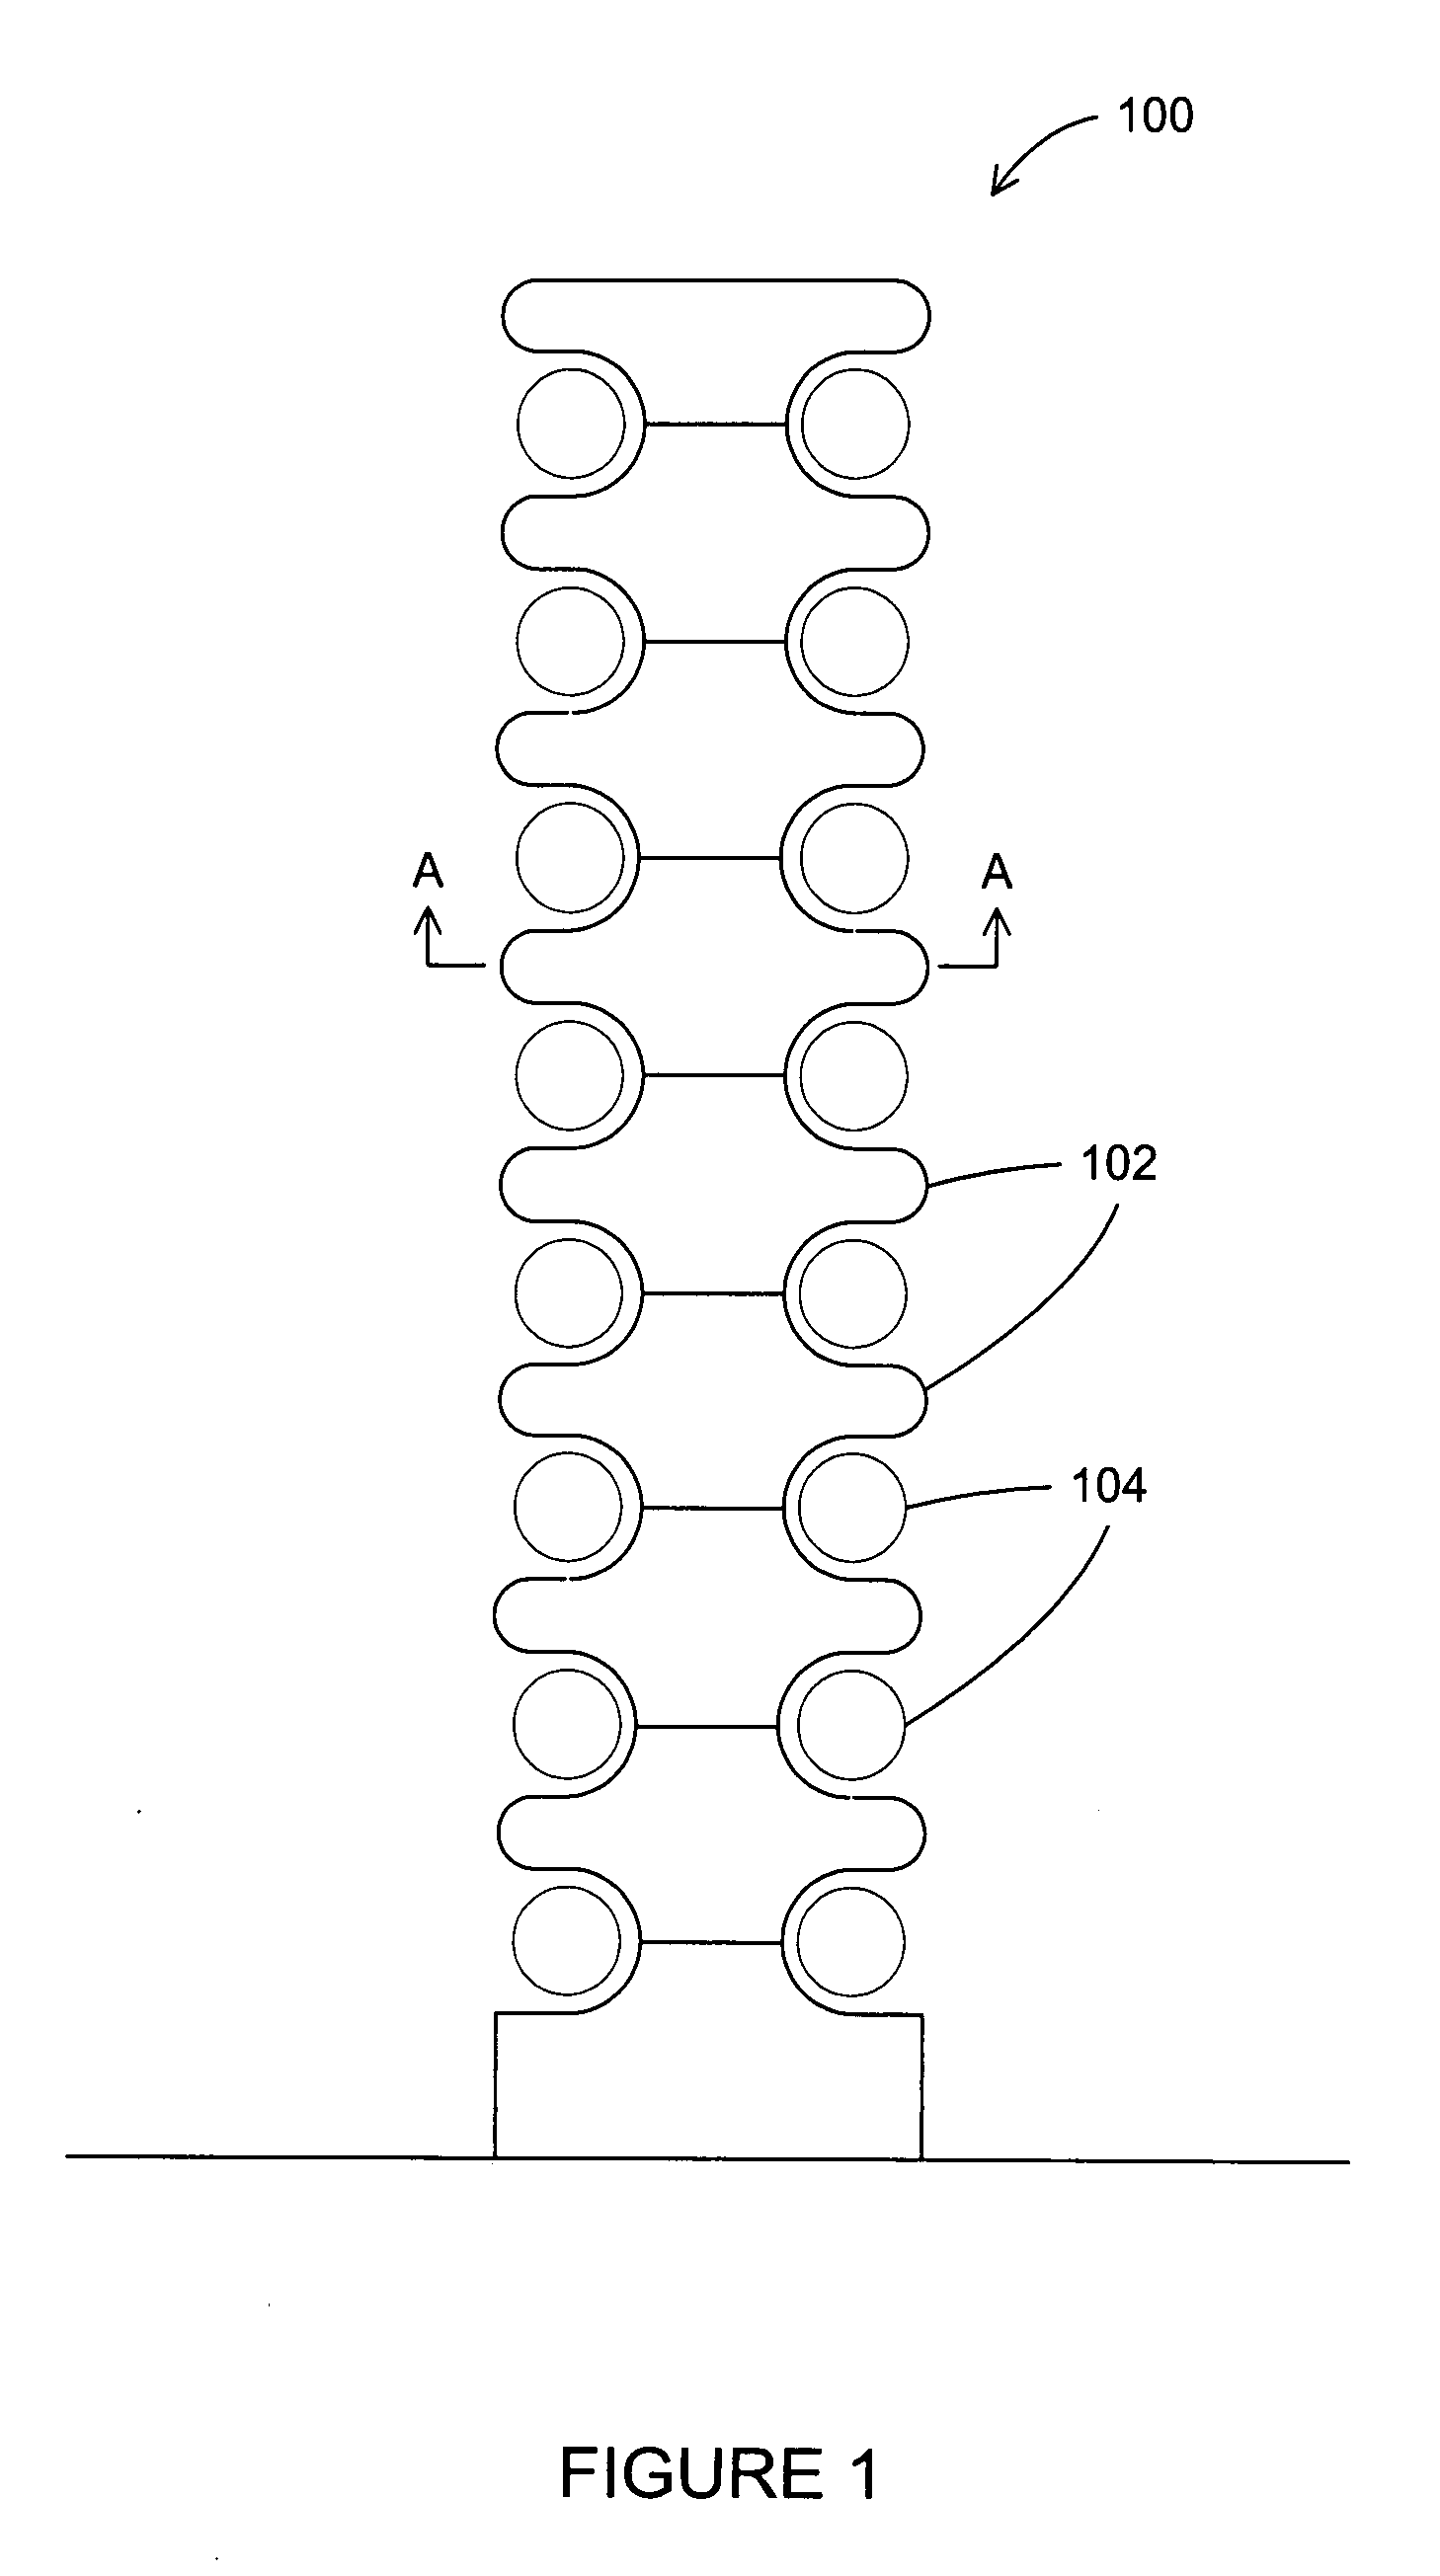 Augmented wind power generation system using continuously variable transmission and methd of operation